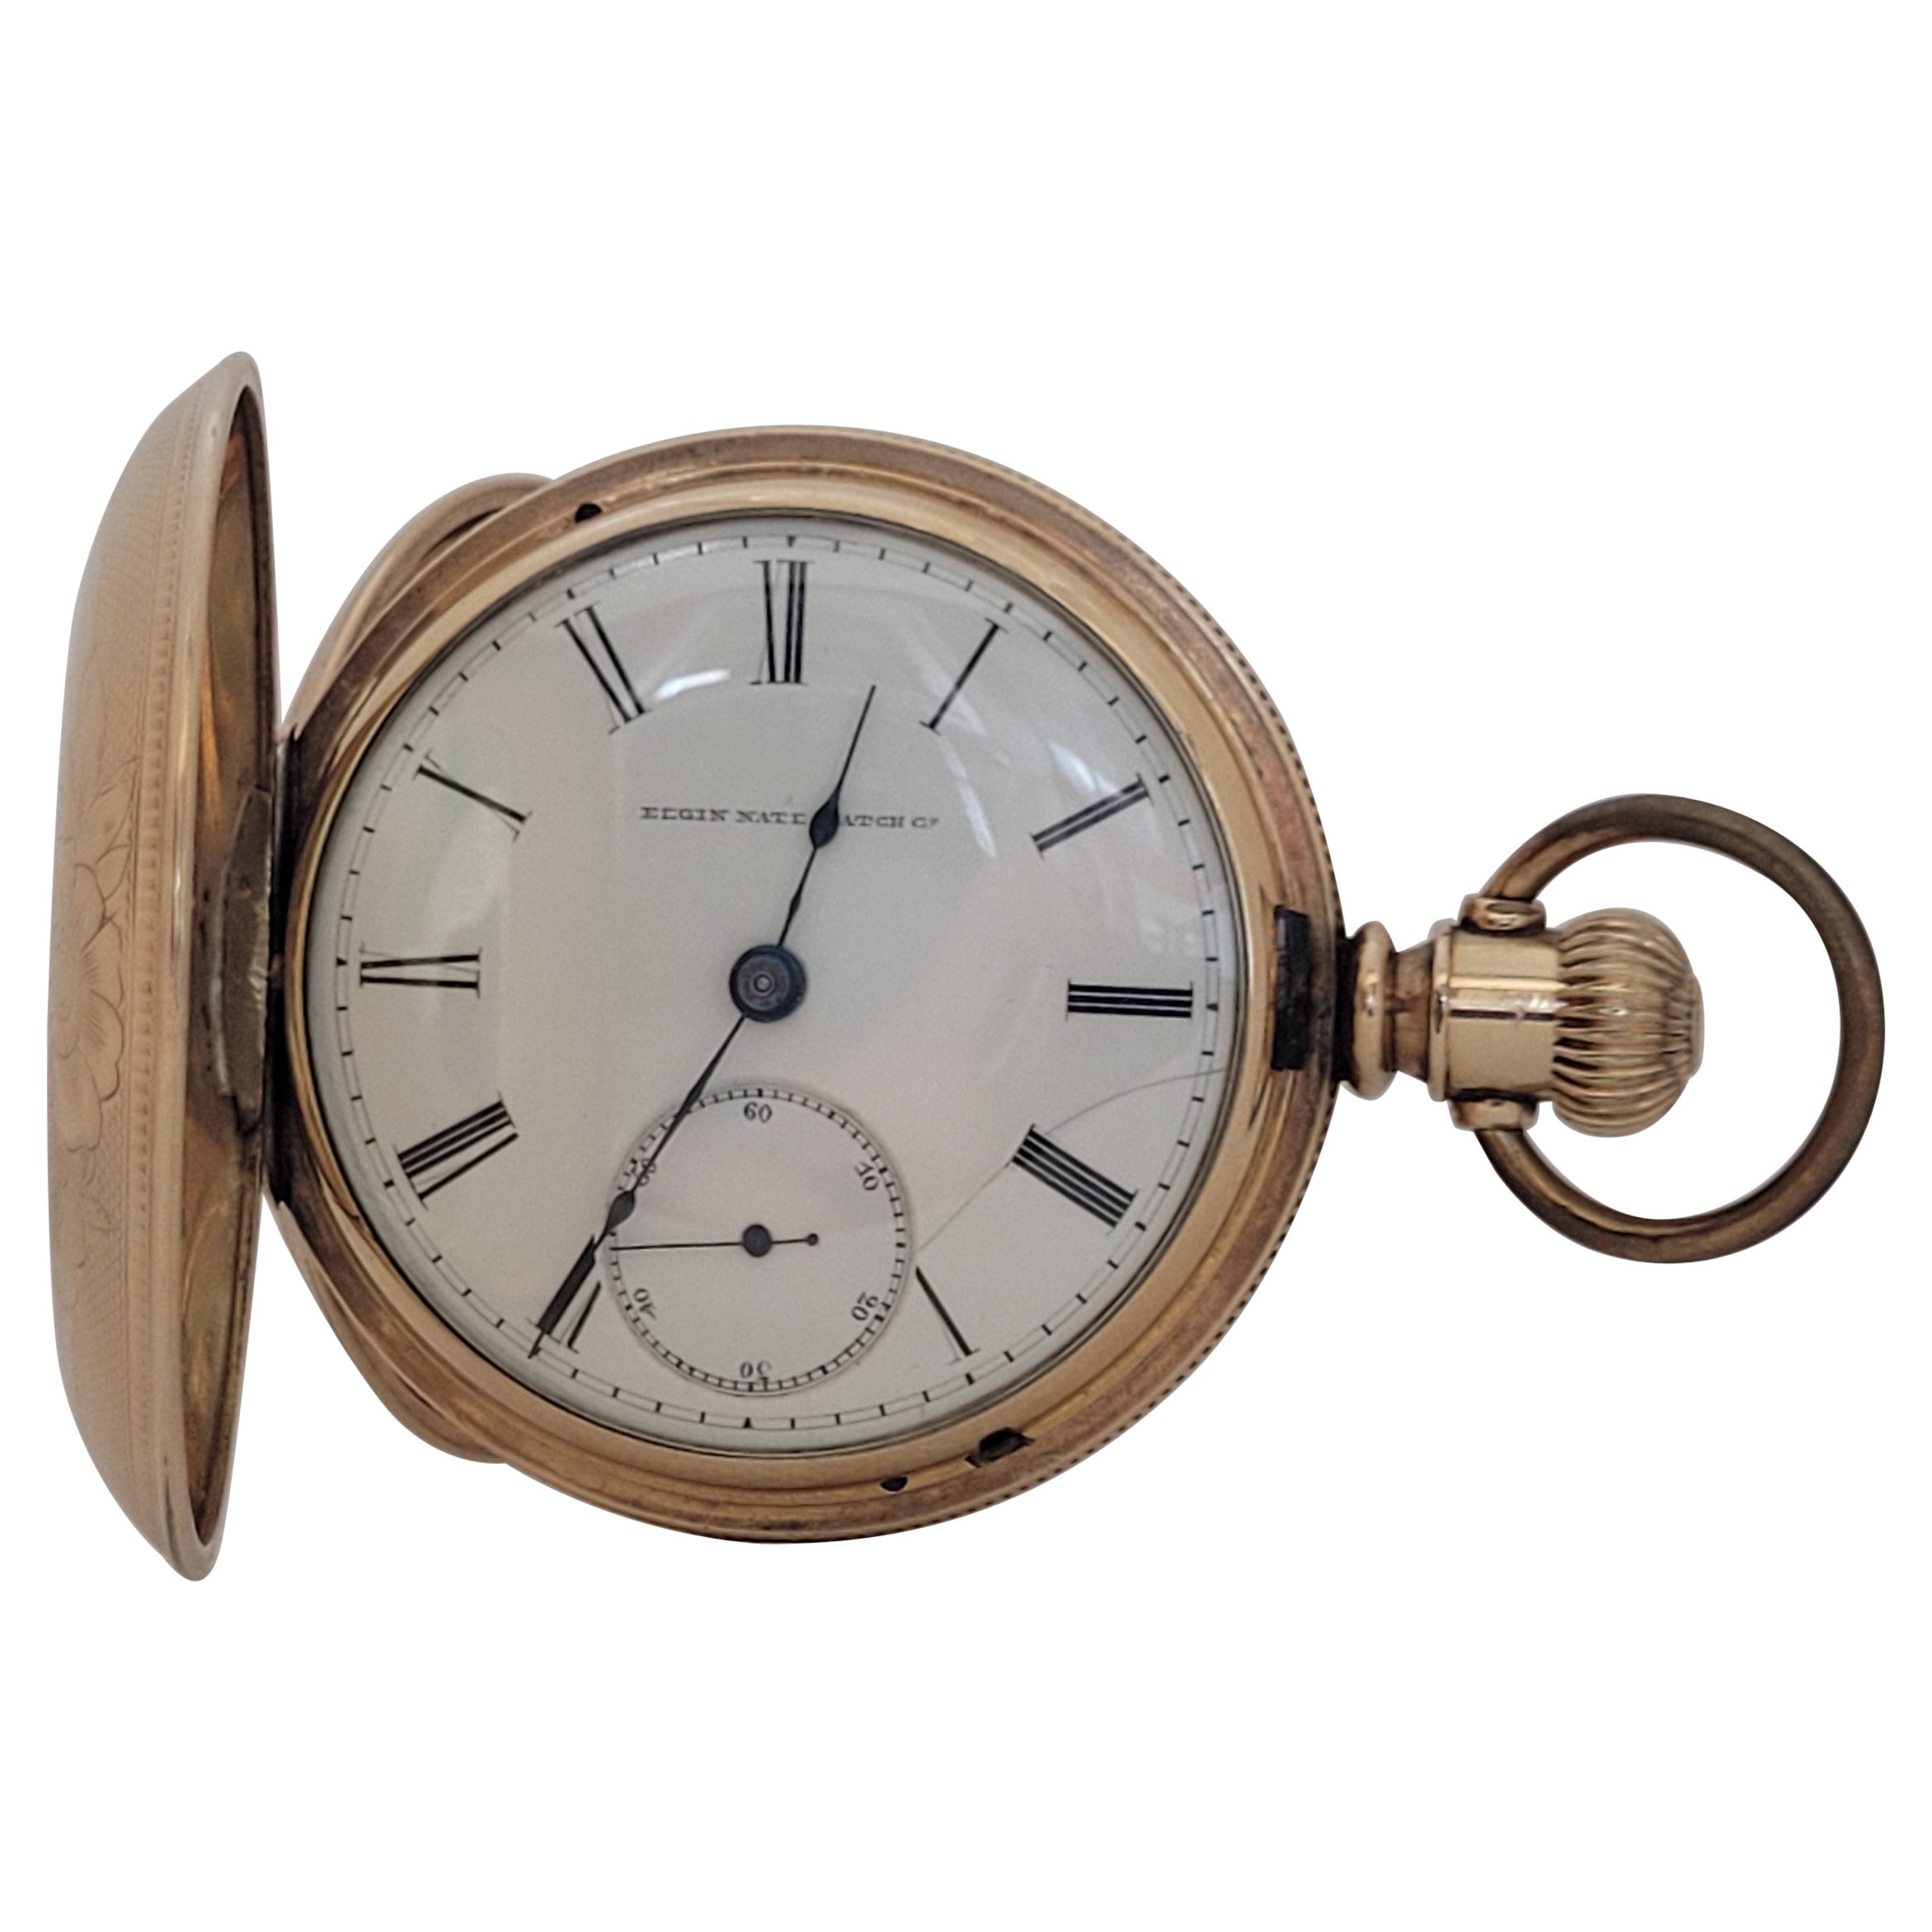 Elgin Gold Plated Pocket Watch, 53mm, 1886 Year, Hunting, Serviced/Warranty 